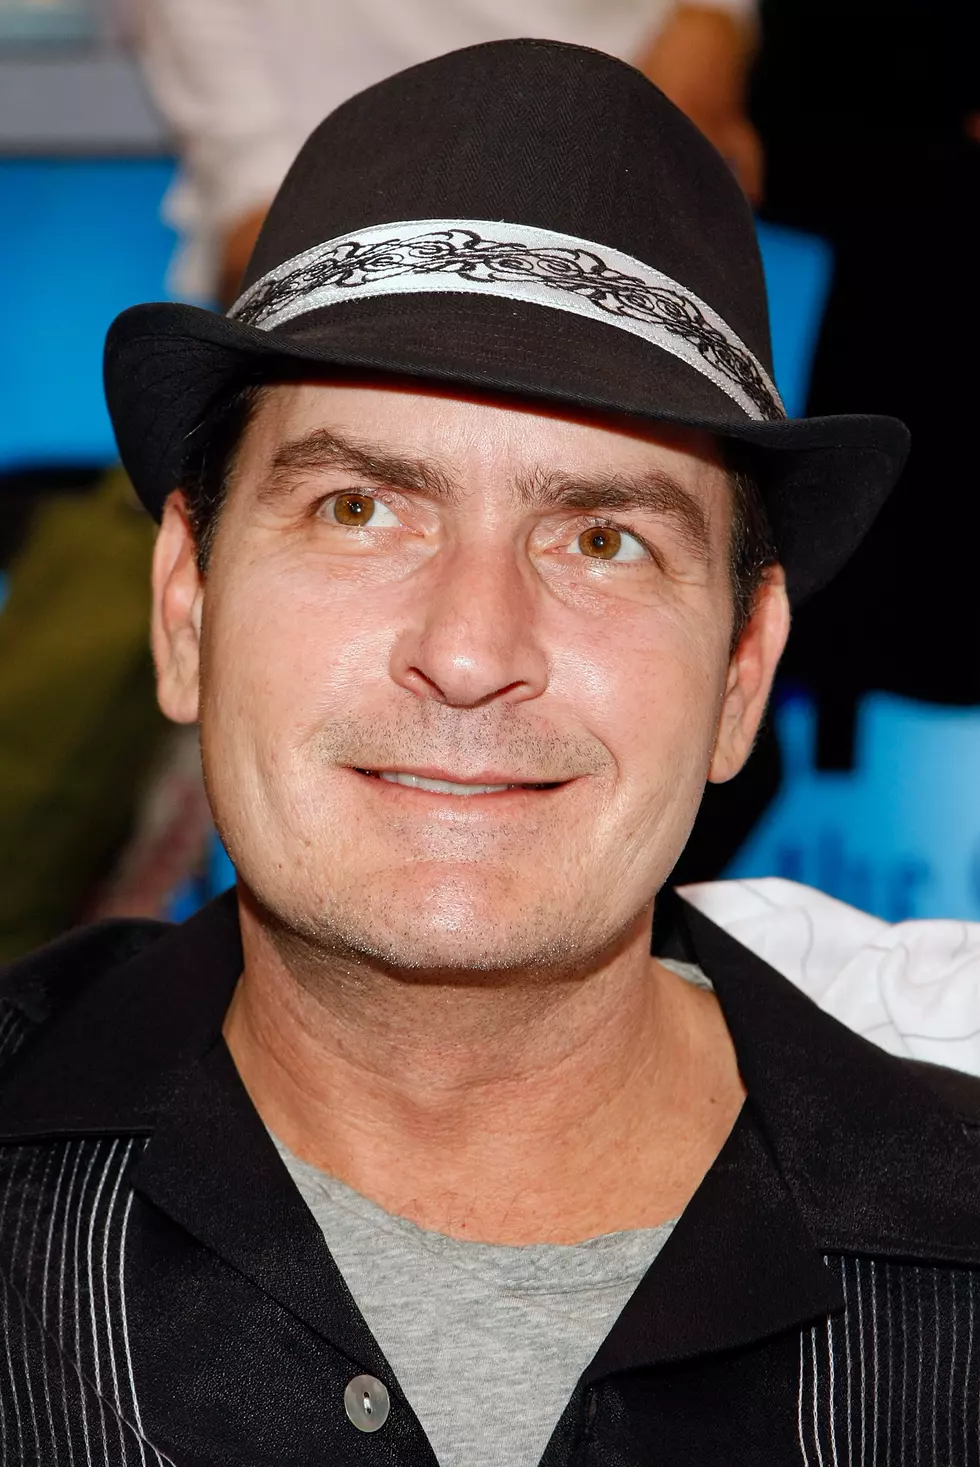 Charlie Sheen To Rehab A Mistake?